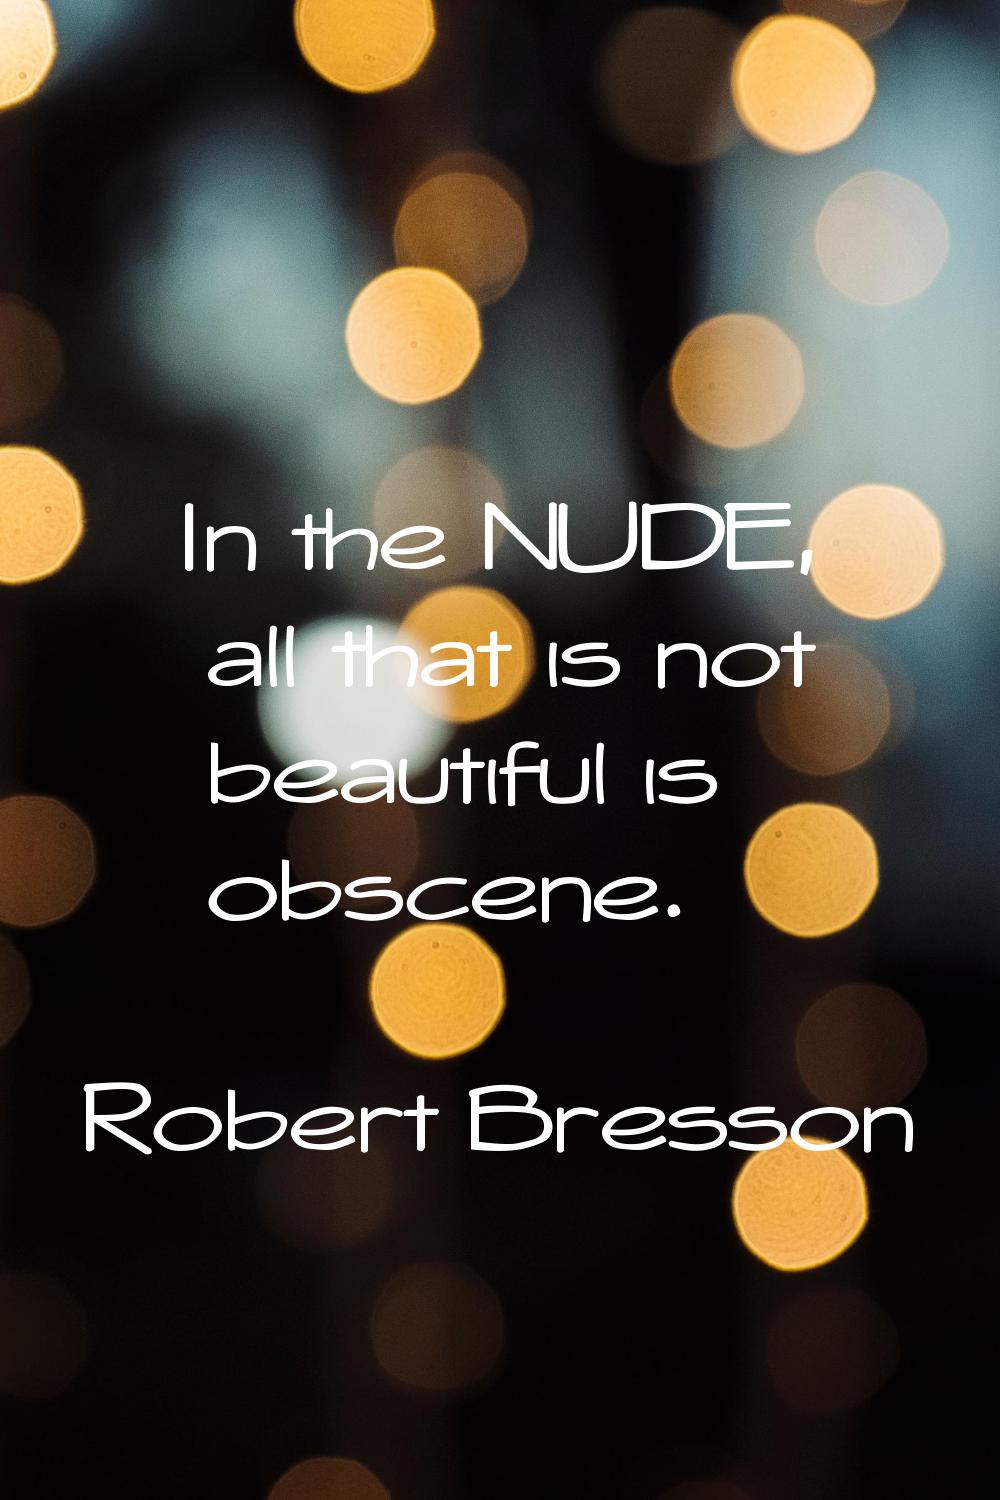 In the NUDE, all that is not beautiful is obscene.